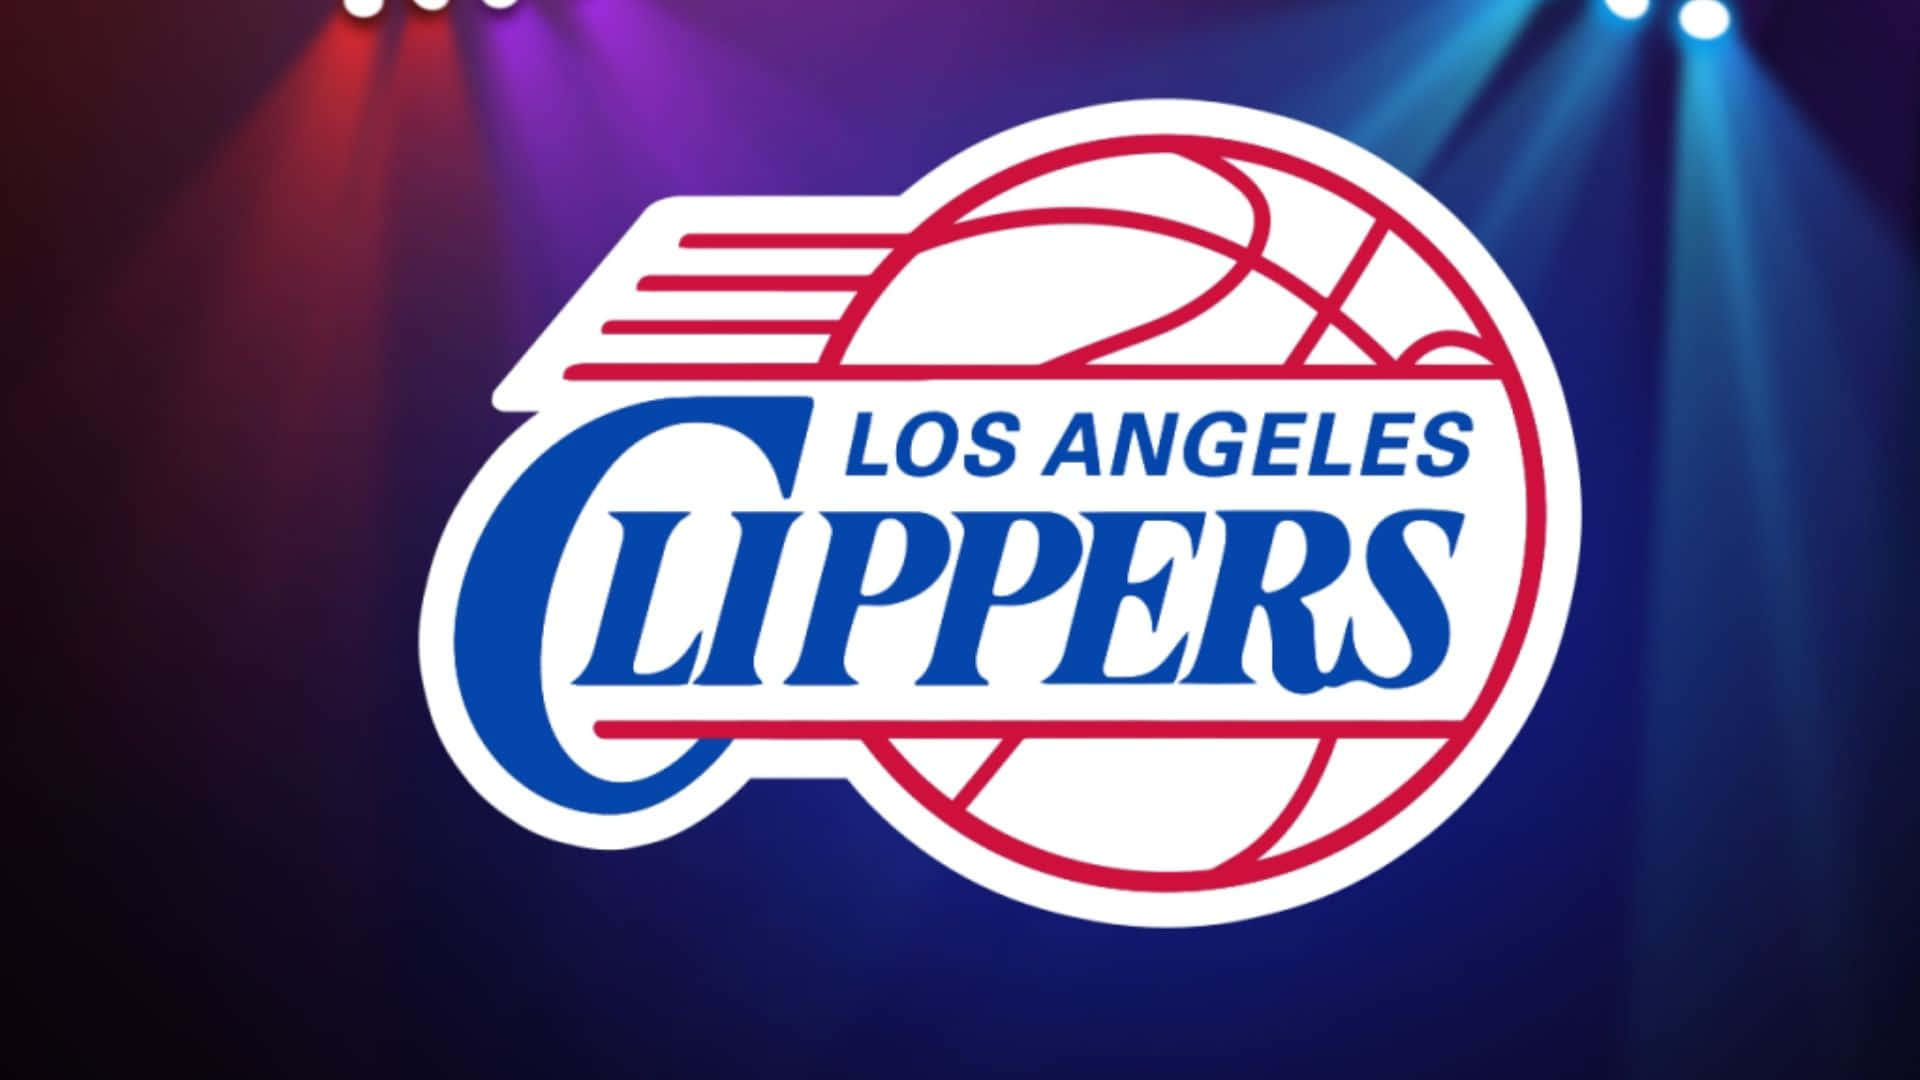 Image  Los Angeles Clippers Battle it Out in a High-Octane Game Wallpaper